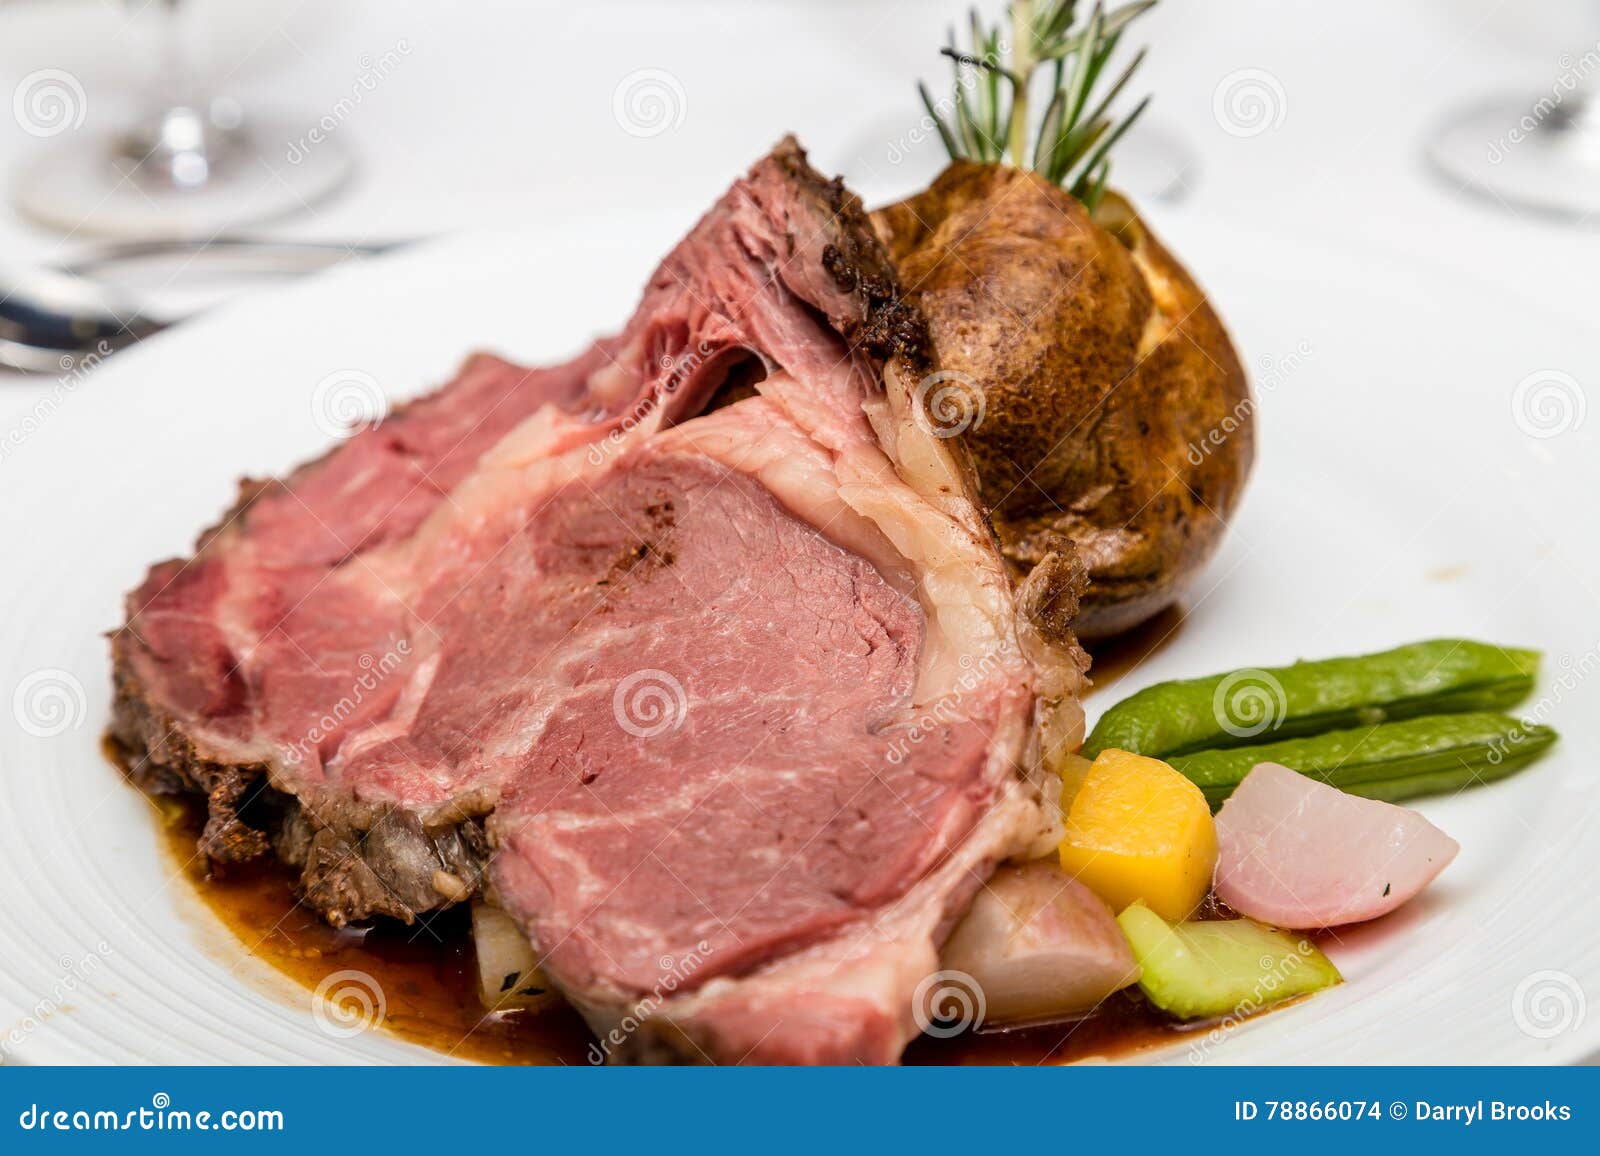 Prime Rib With Potato And Vegetables Stock Photo Image Of Roasted Plate 78866074